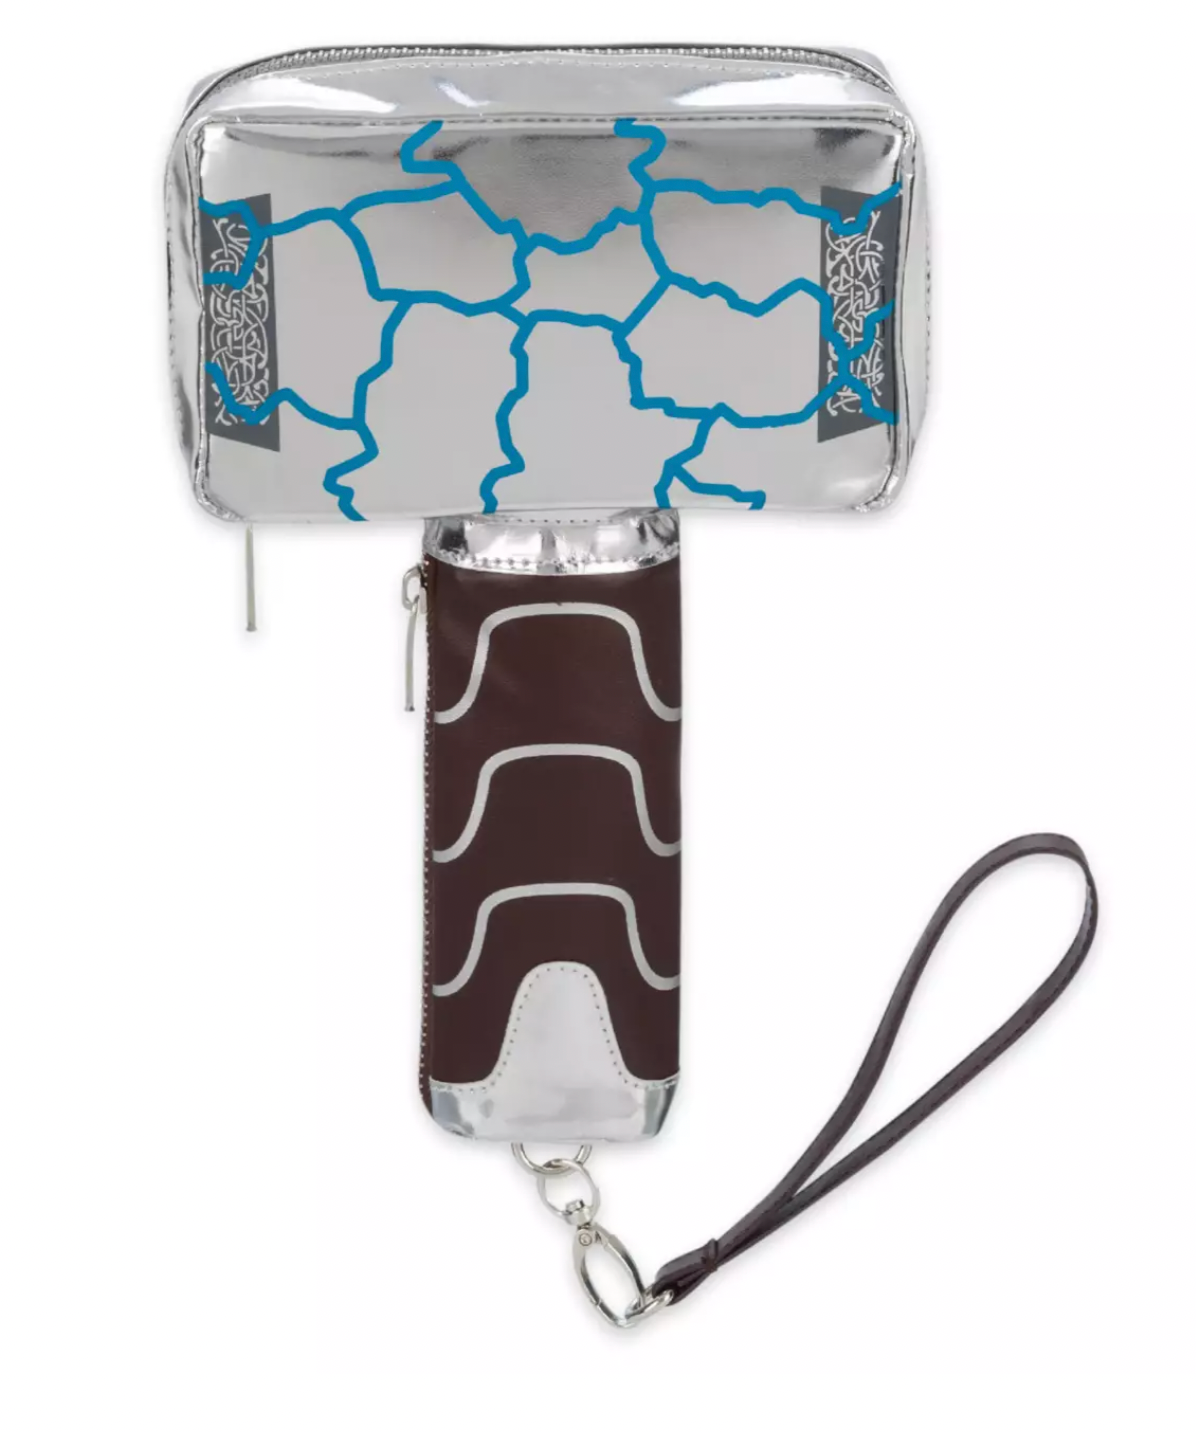 Disney Thor Love and Thunder Mighty Mjolnir Wristlet New with Tag - image 1 of 3